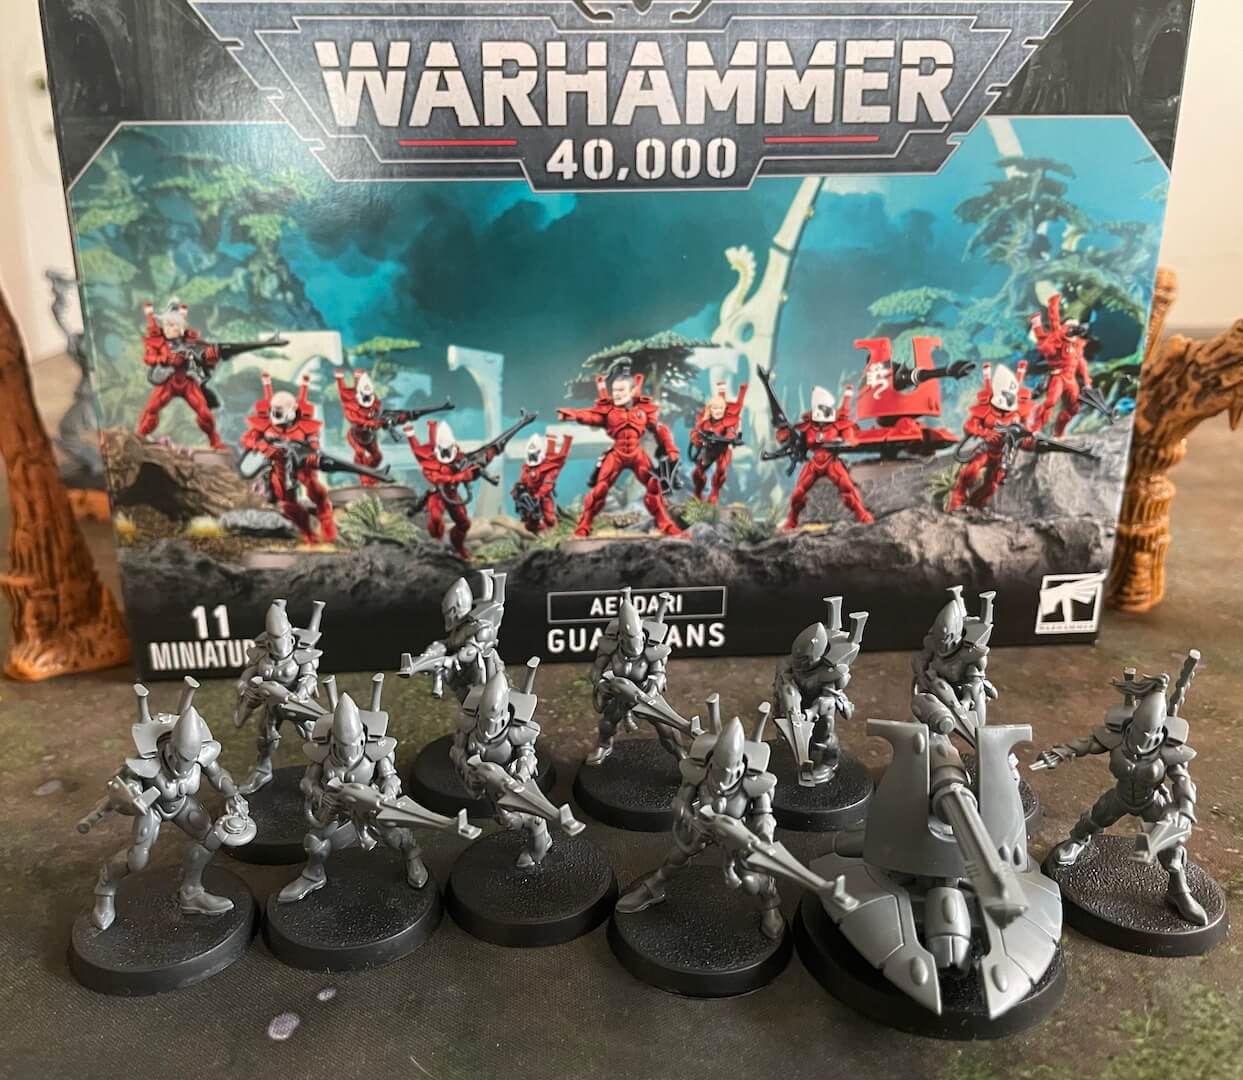 These Warhammer 40K Aeldari Guardians are ready to hold their ground.